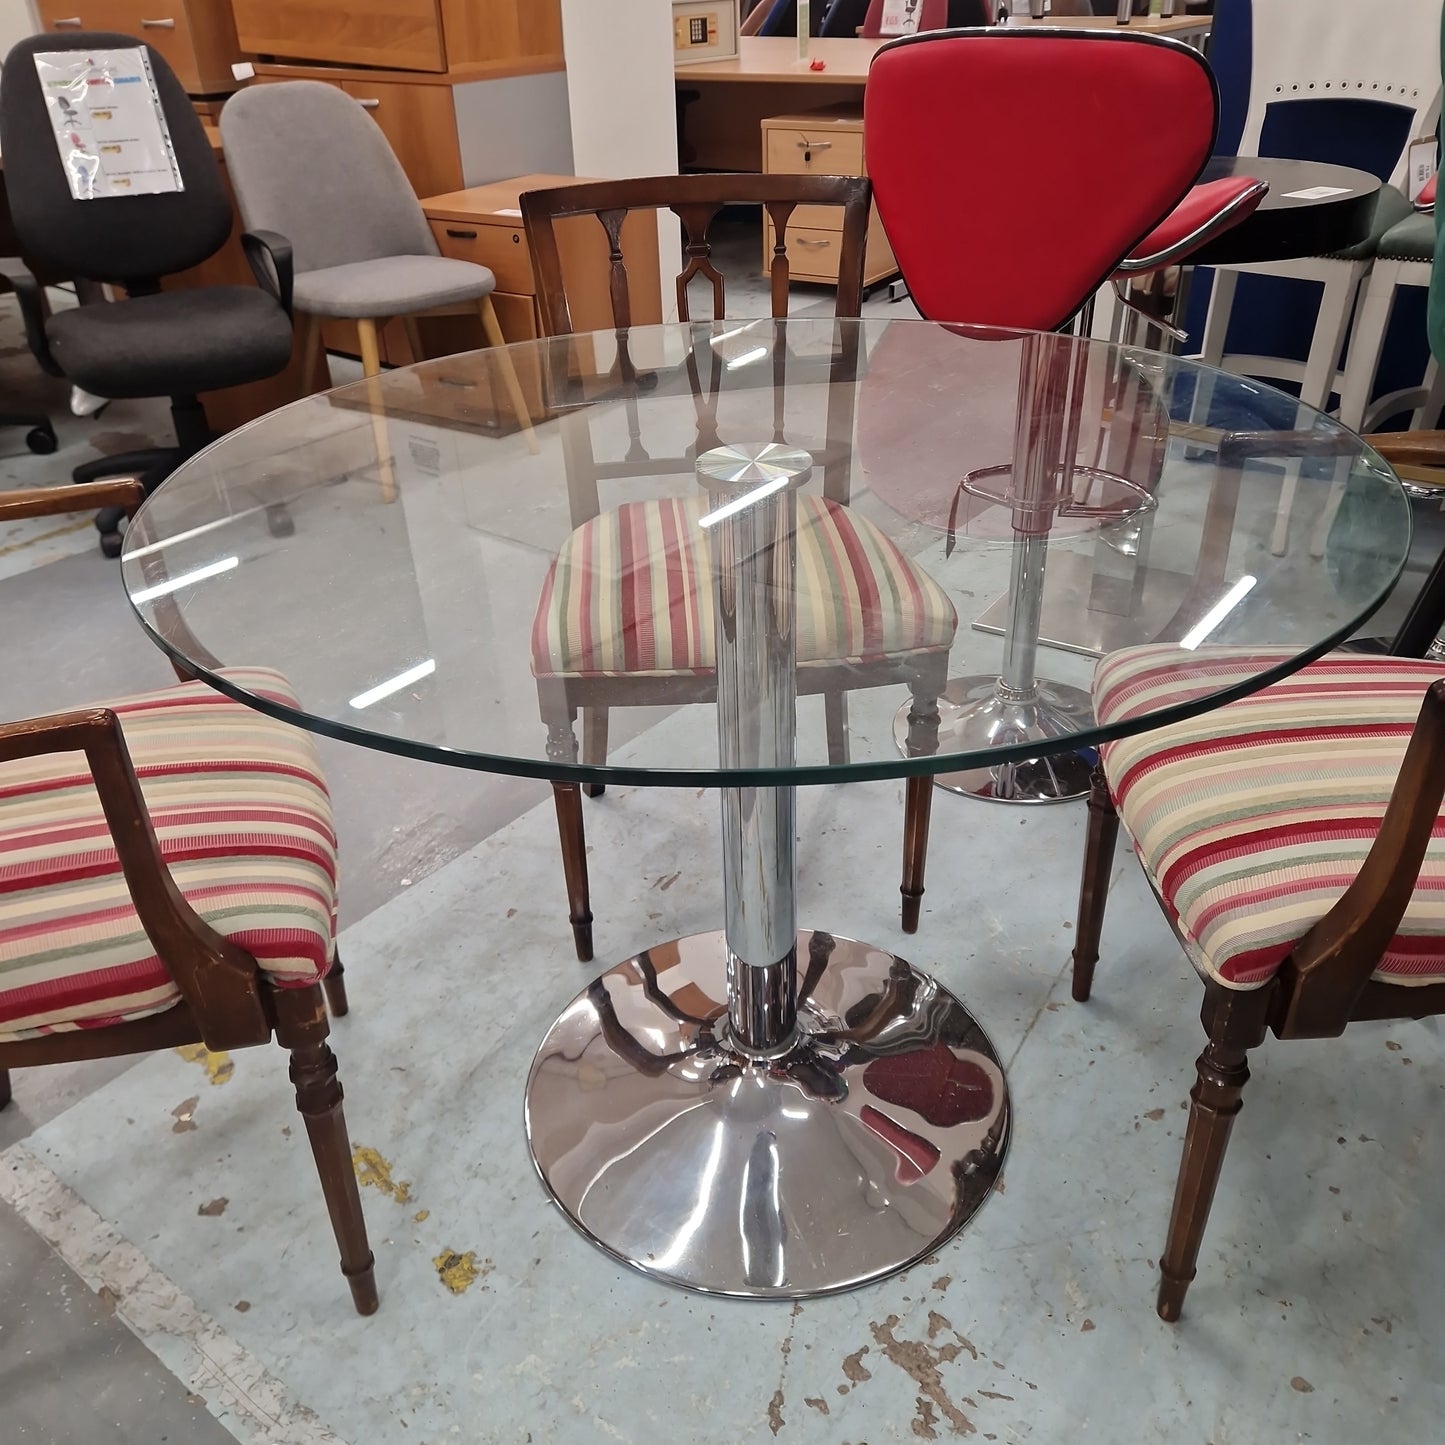 1000 wide toughened glass circular table with polished metal central base